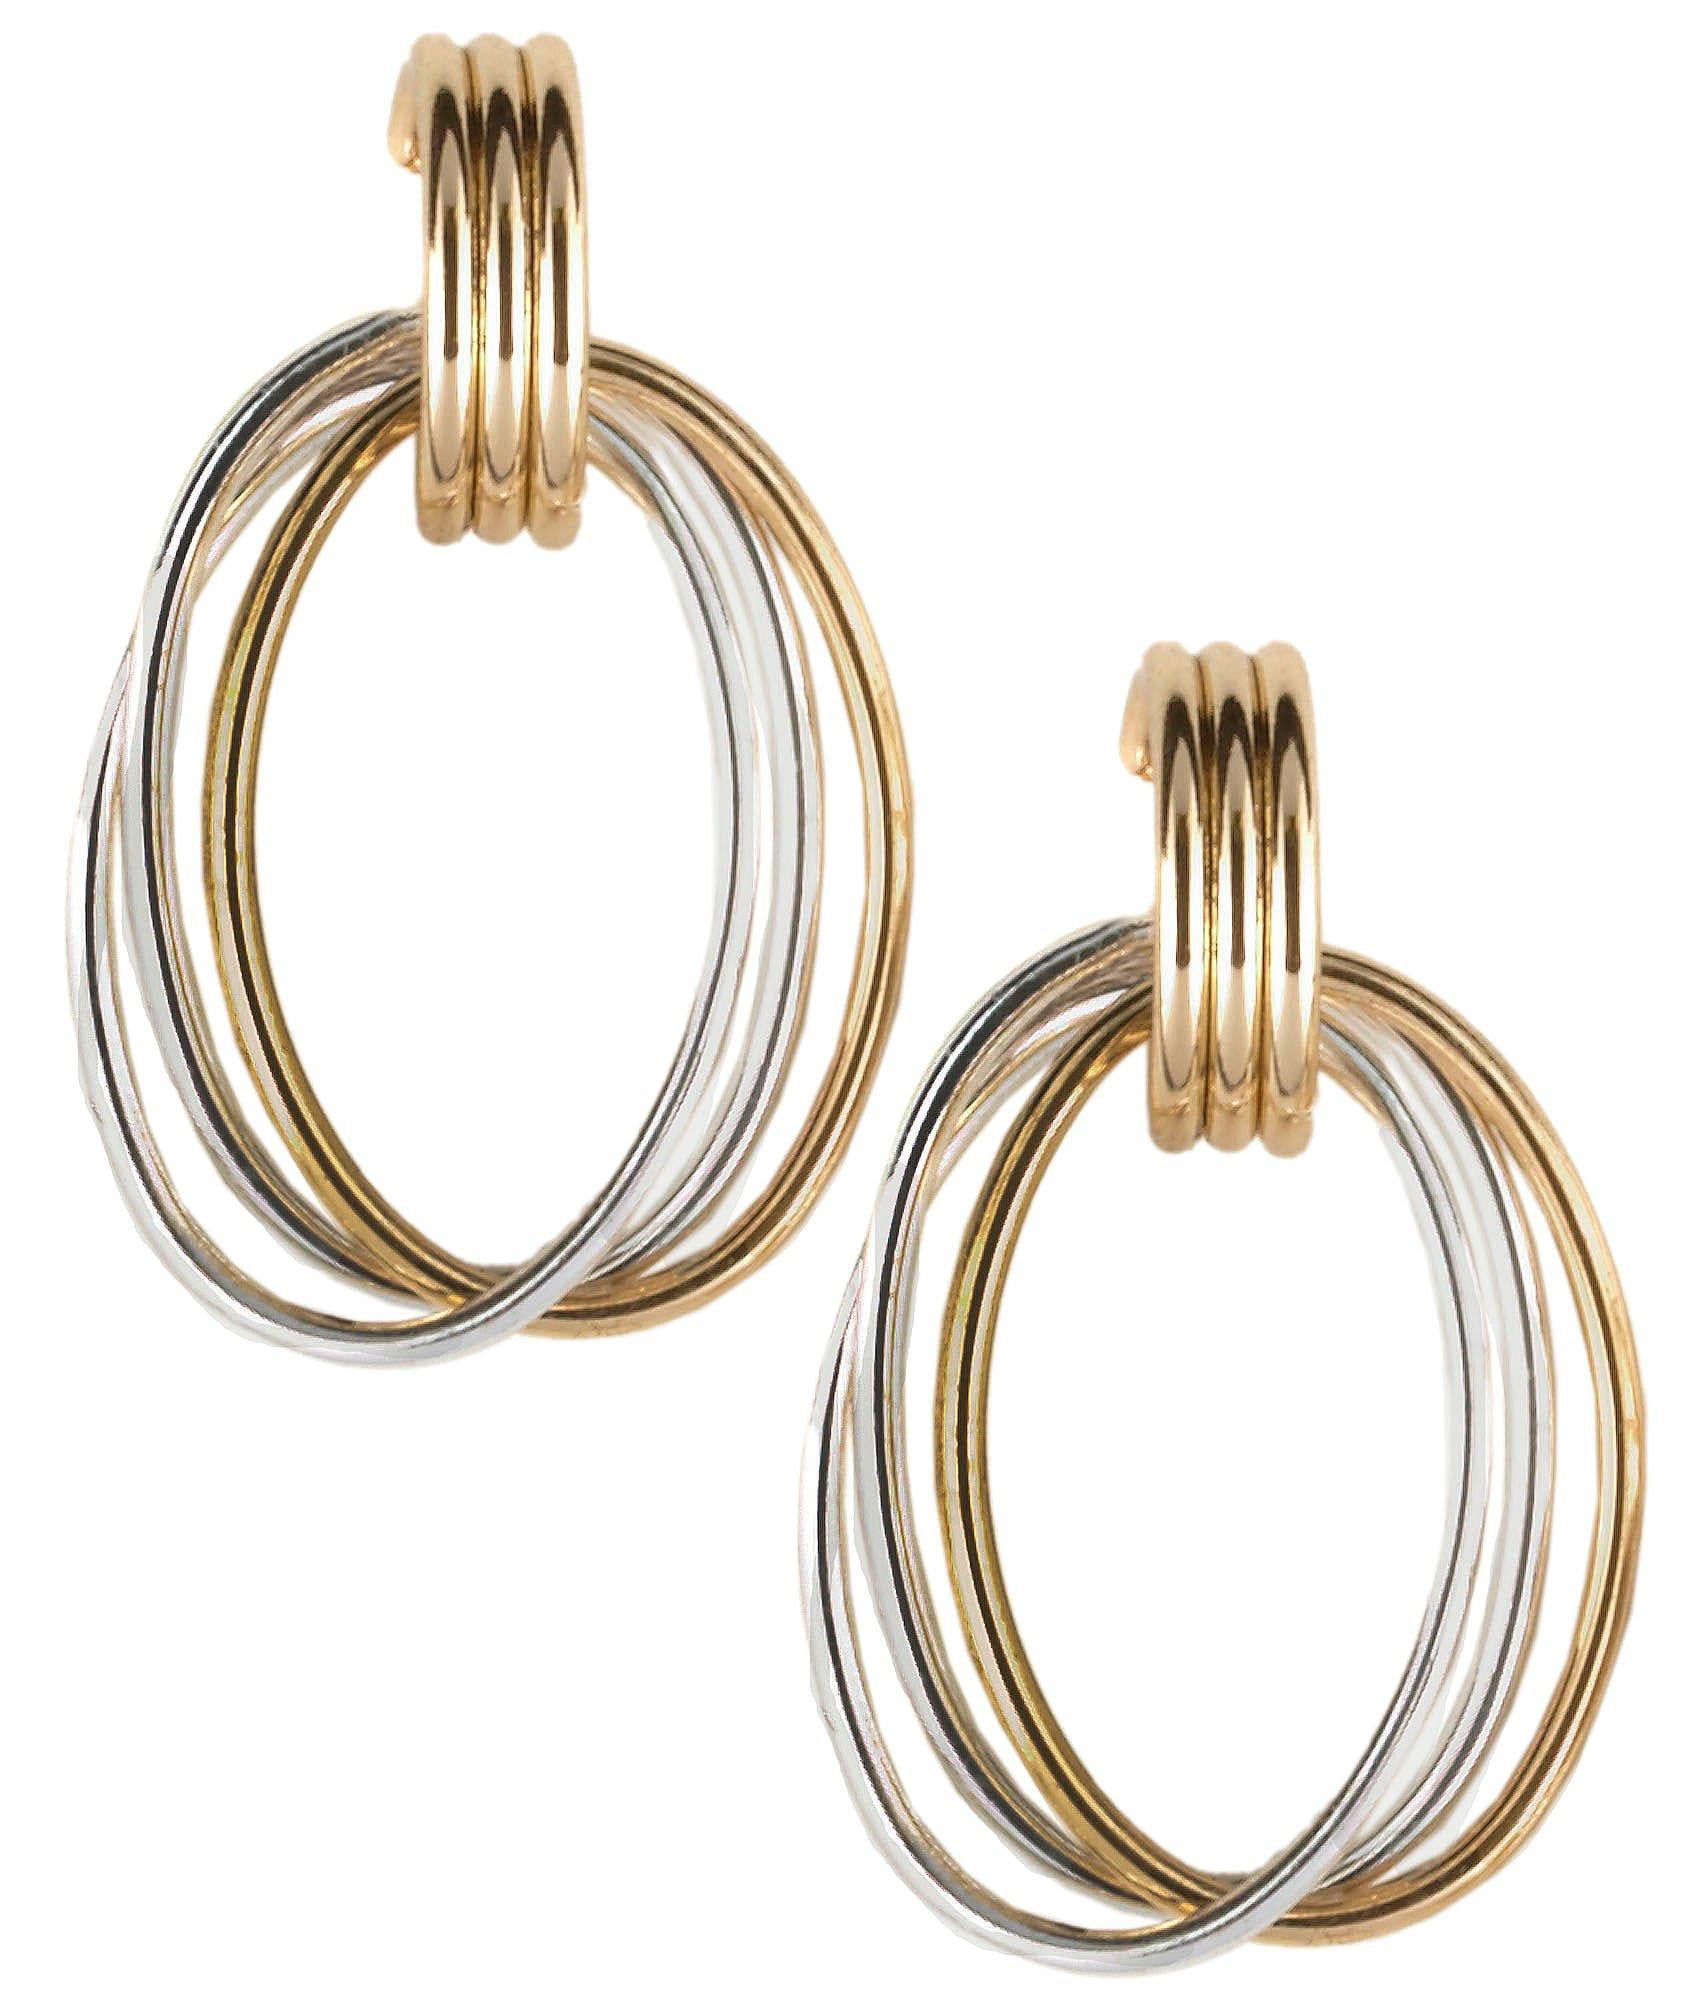 Gold Tone Double Hoop Drop Earrings with Navy and Off-White Enamel 1980s